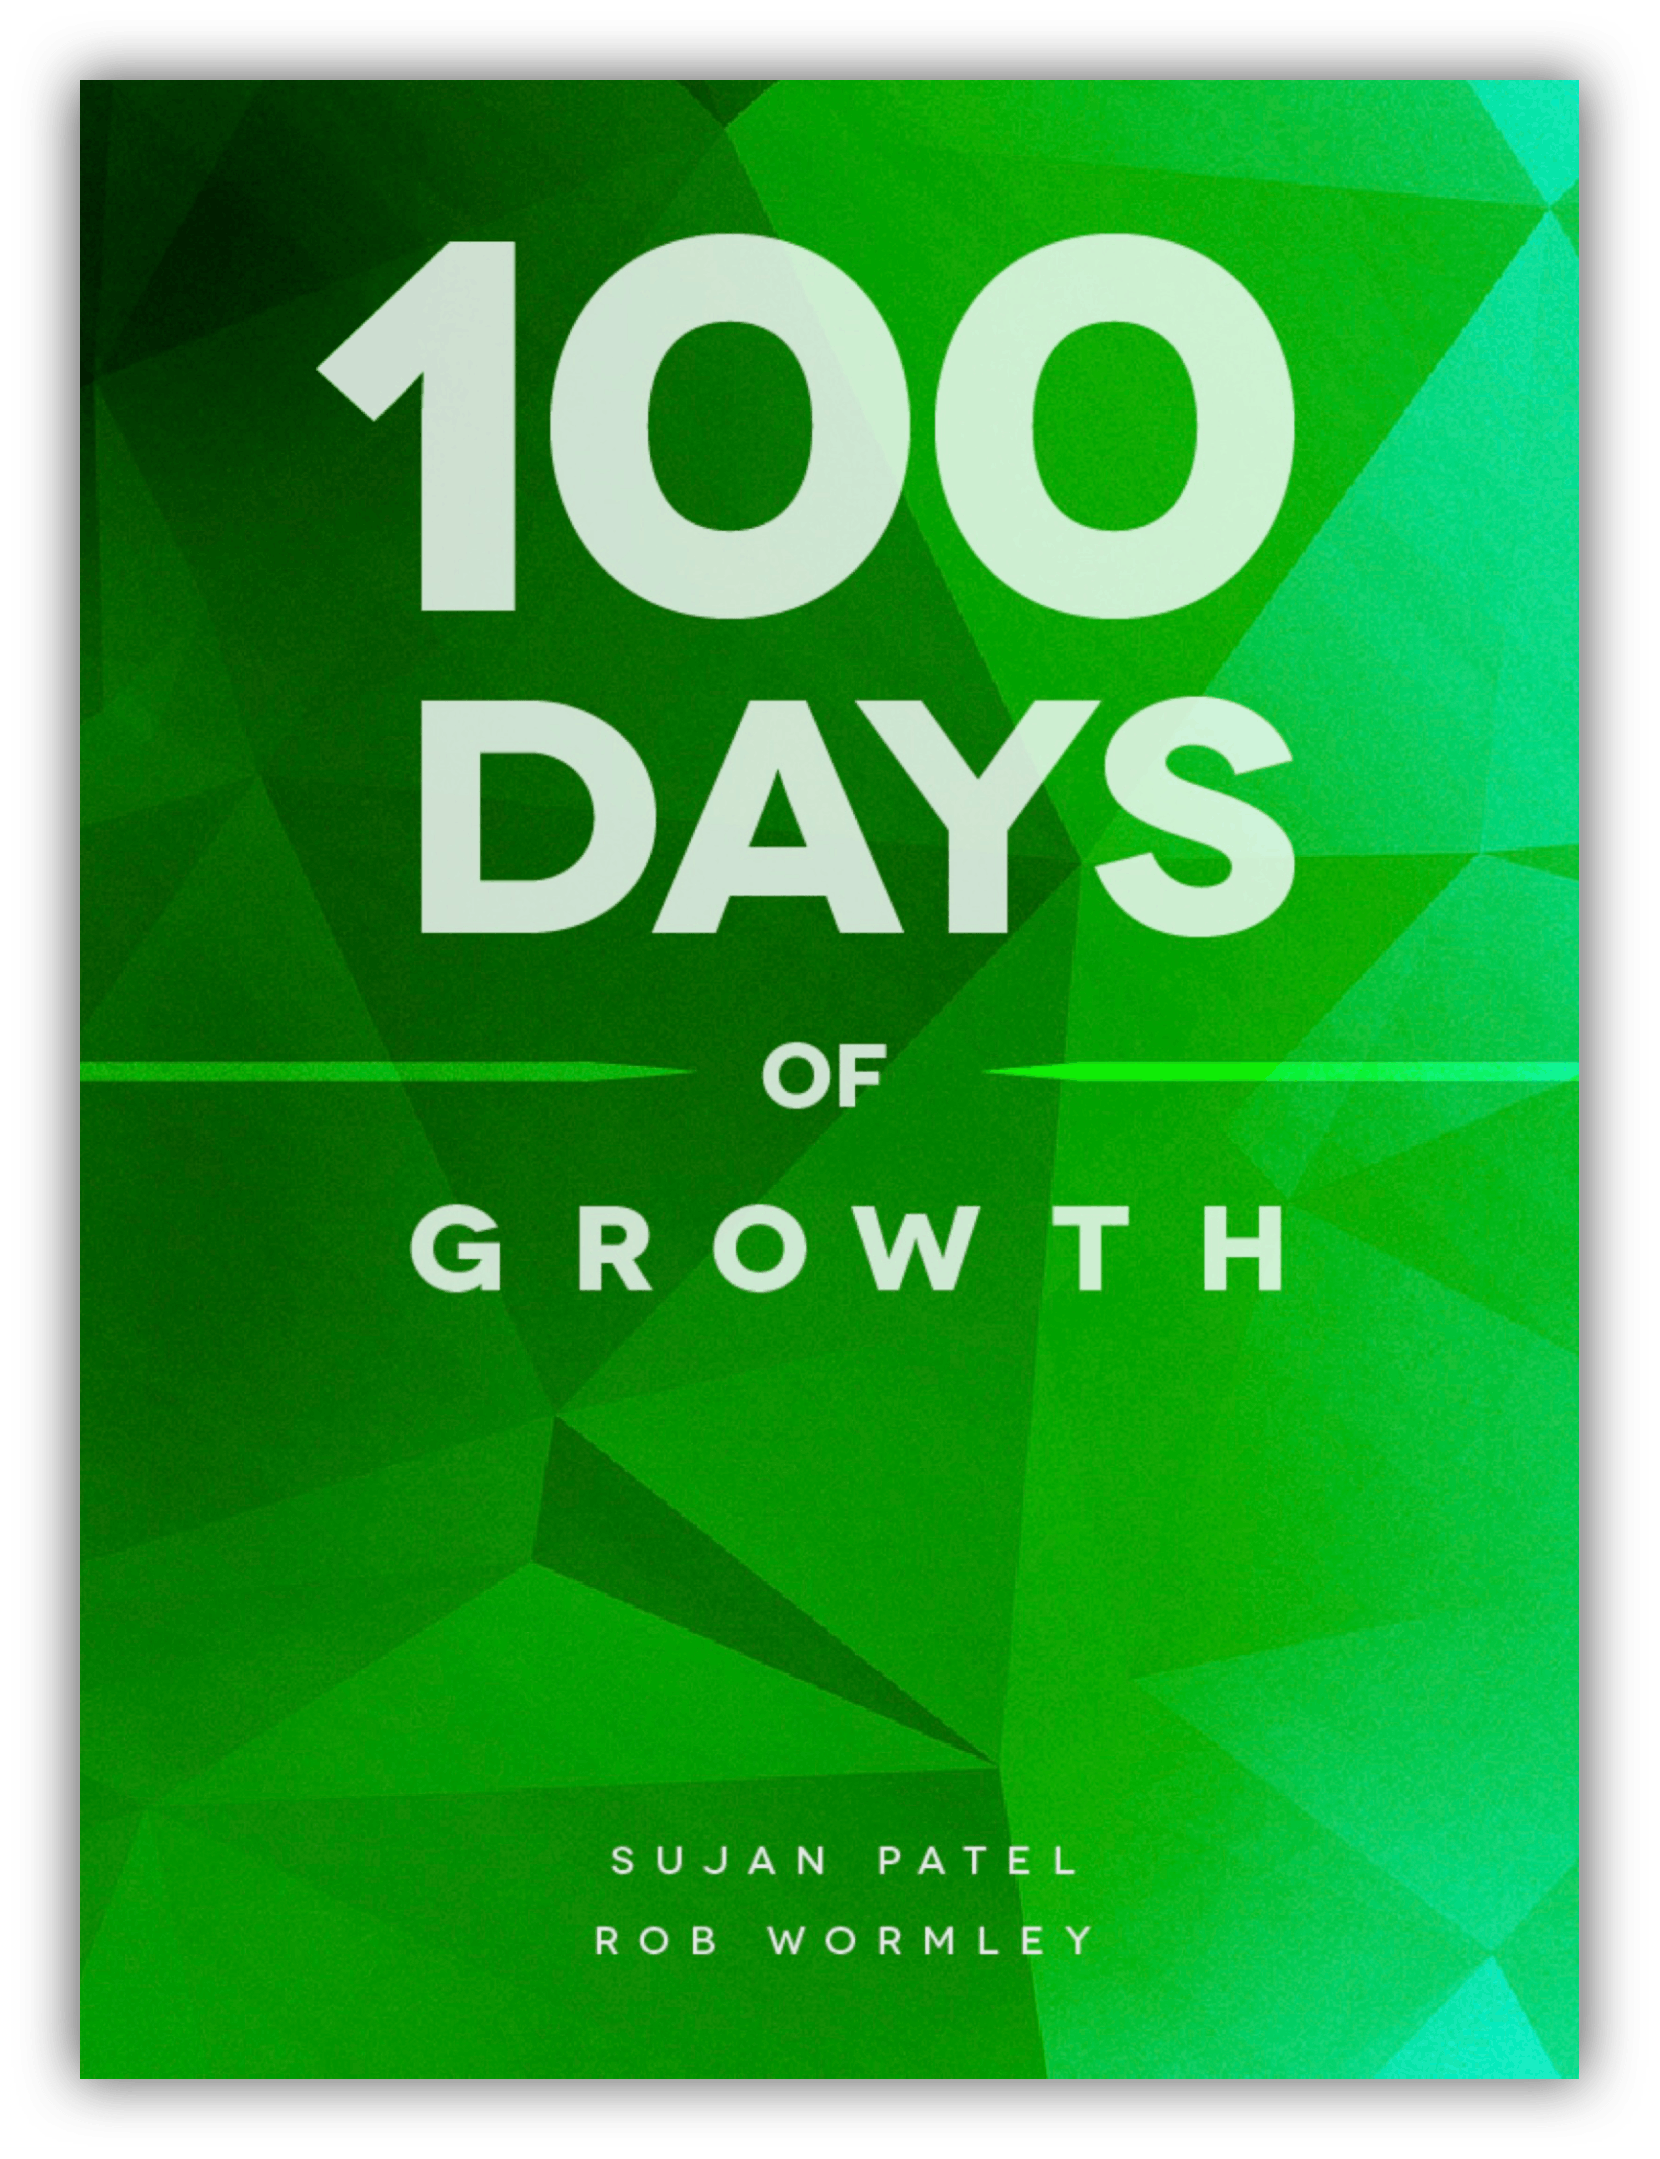 100 days of growth